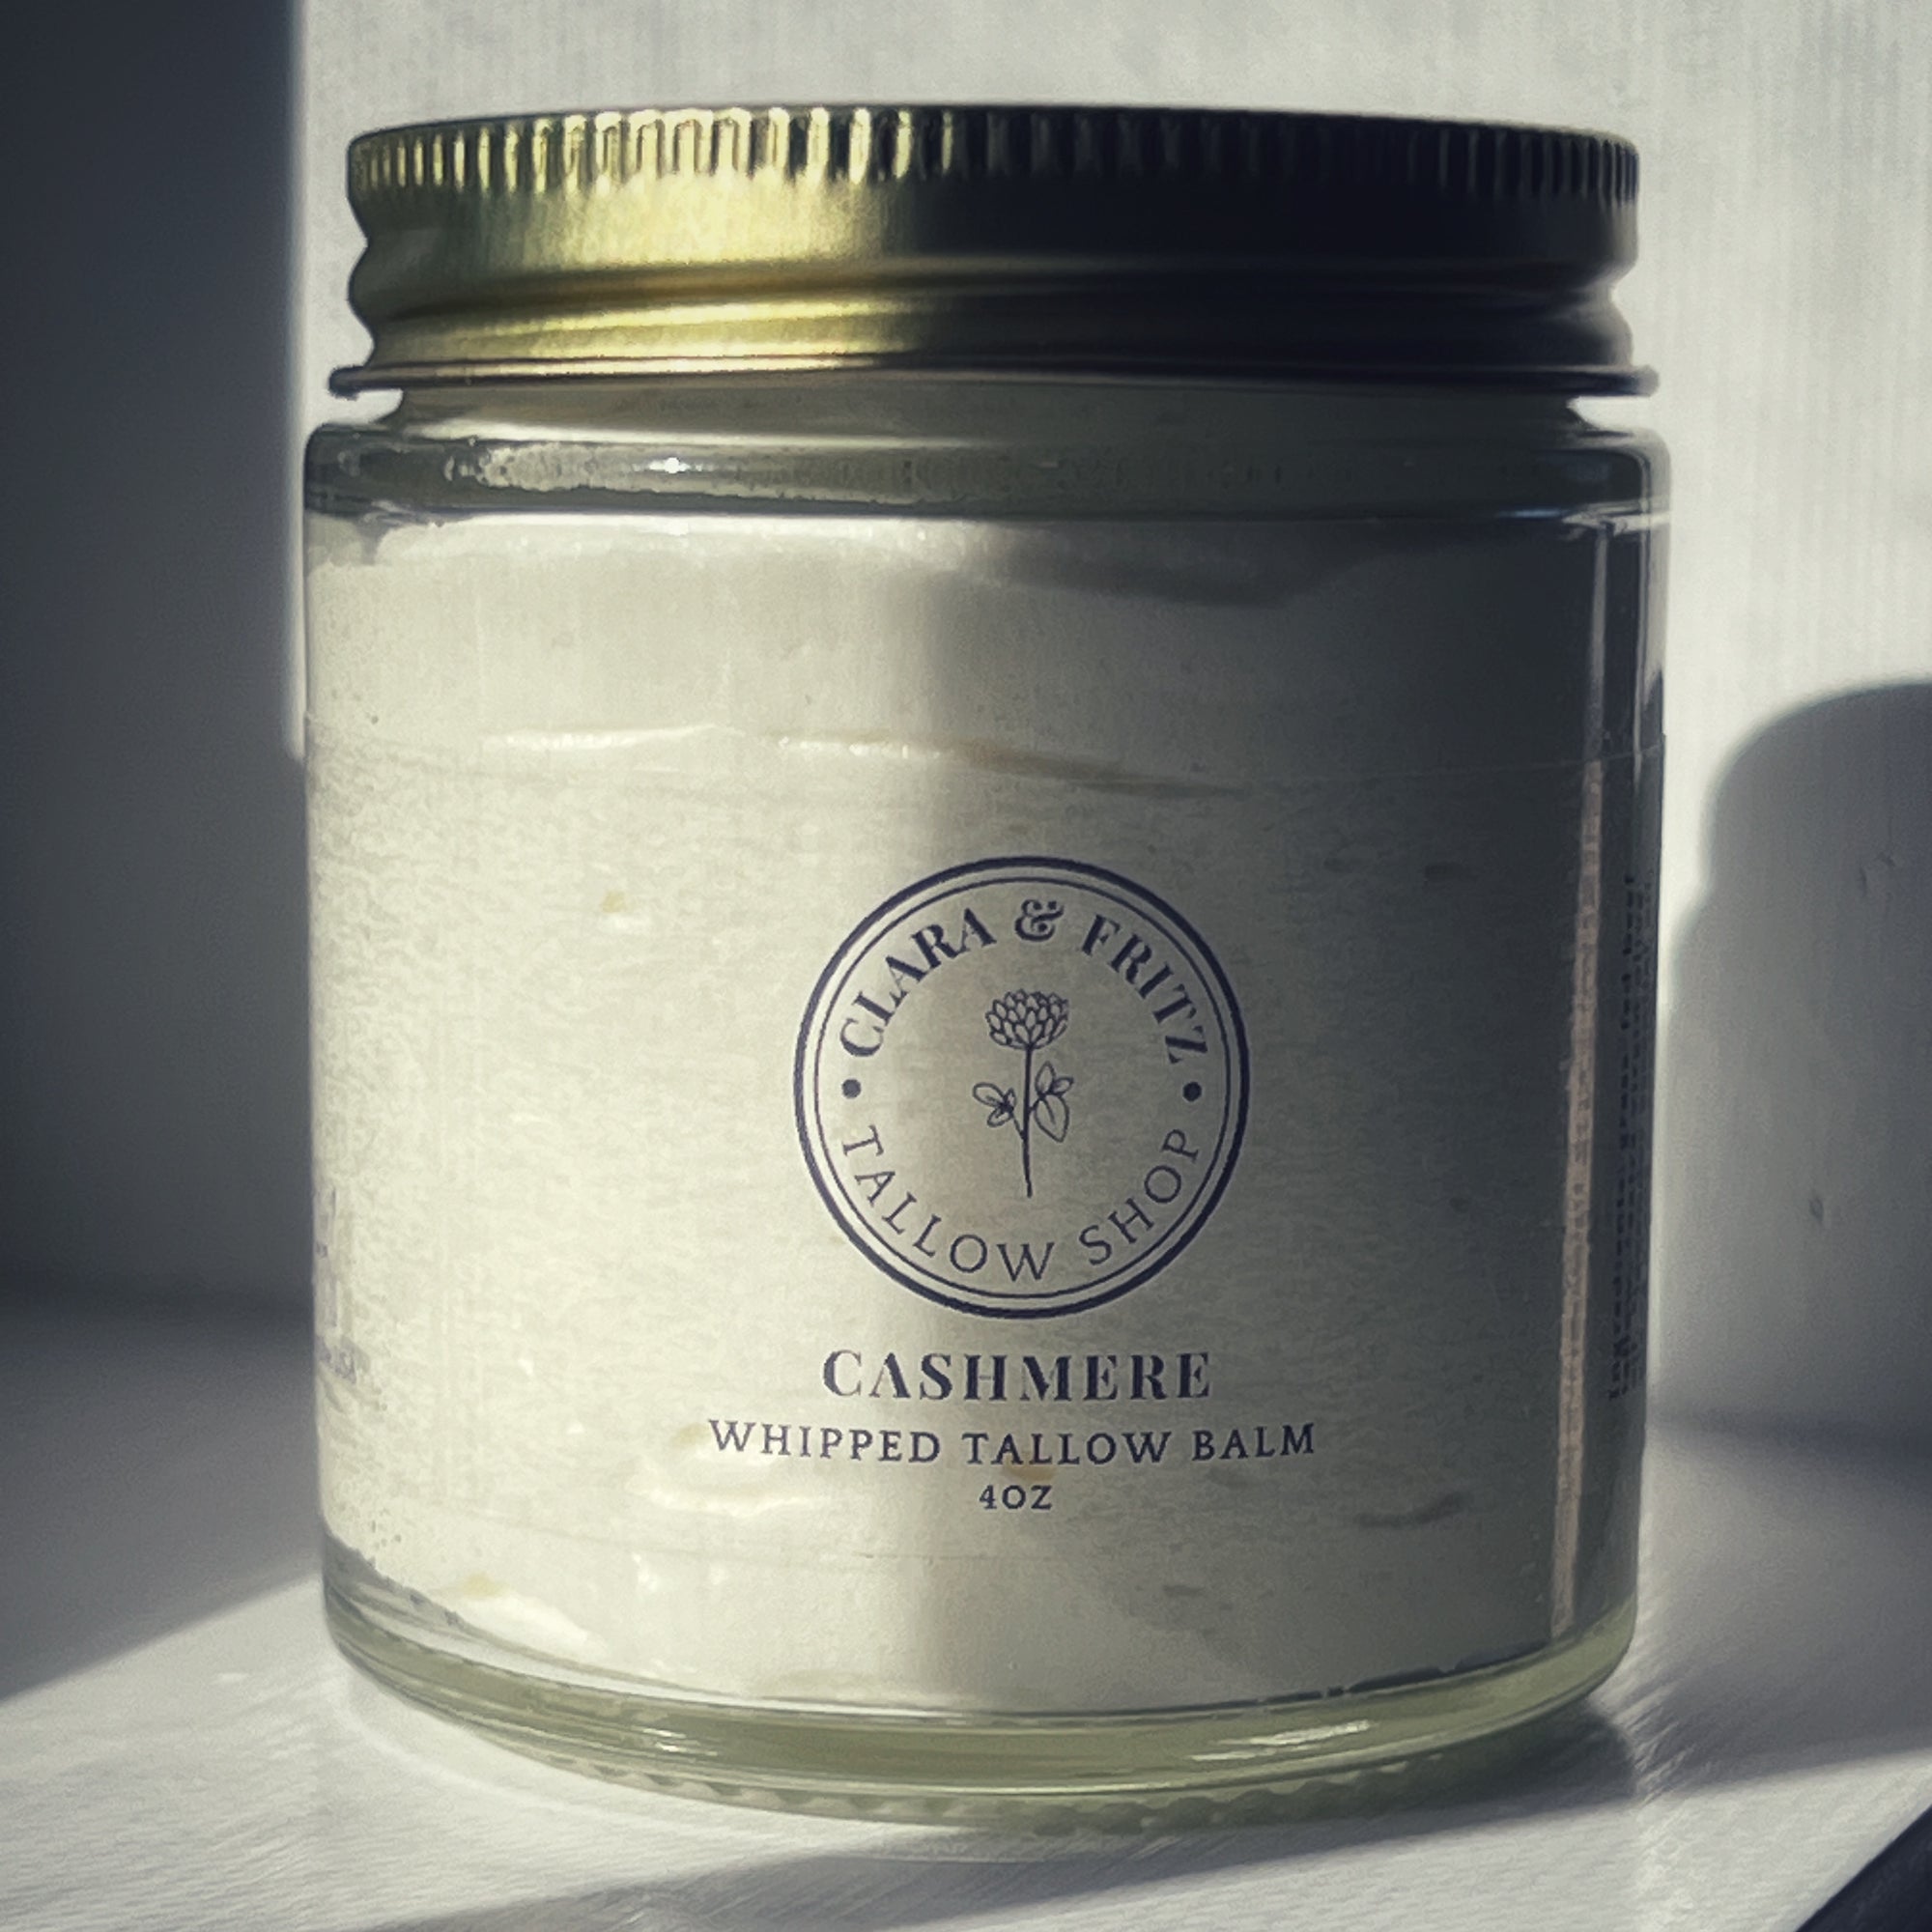 Cashmere Whipped Tallow Balm